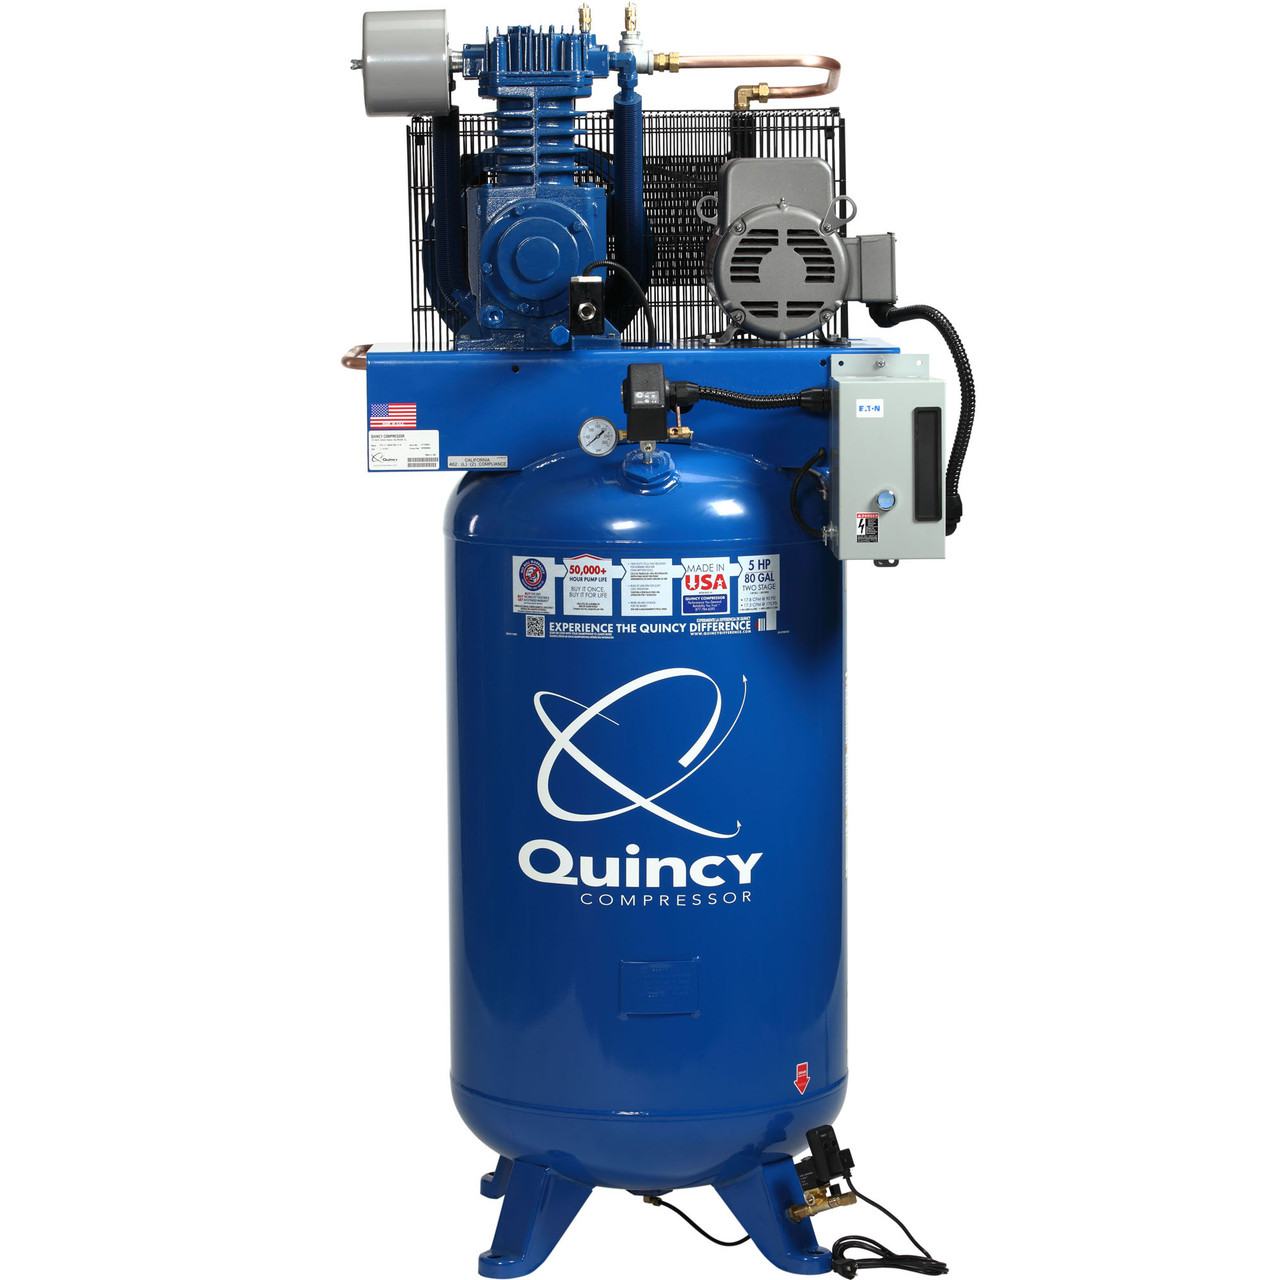 Quincy 273D80VCB46M 7.5 HP MAX, 460 Volt Three Phase, Two Stage, 80 Gallon Vertical Air Compressor